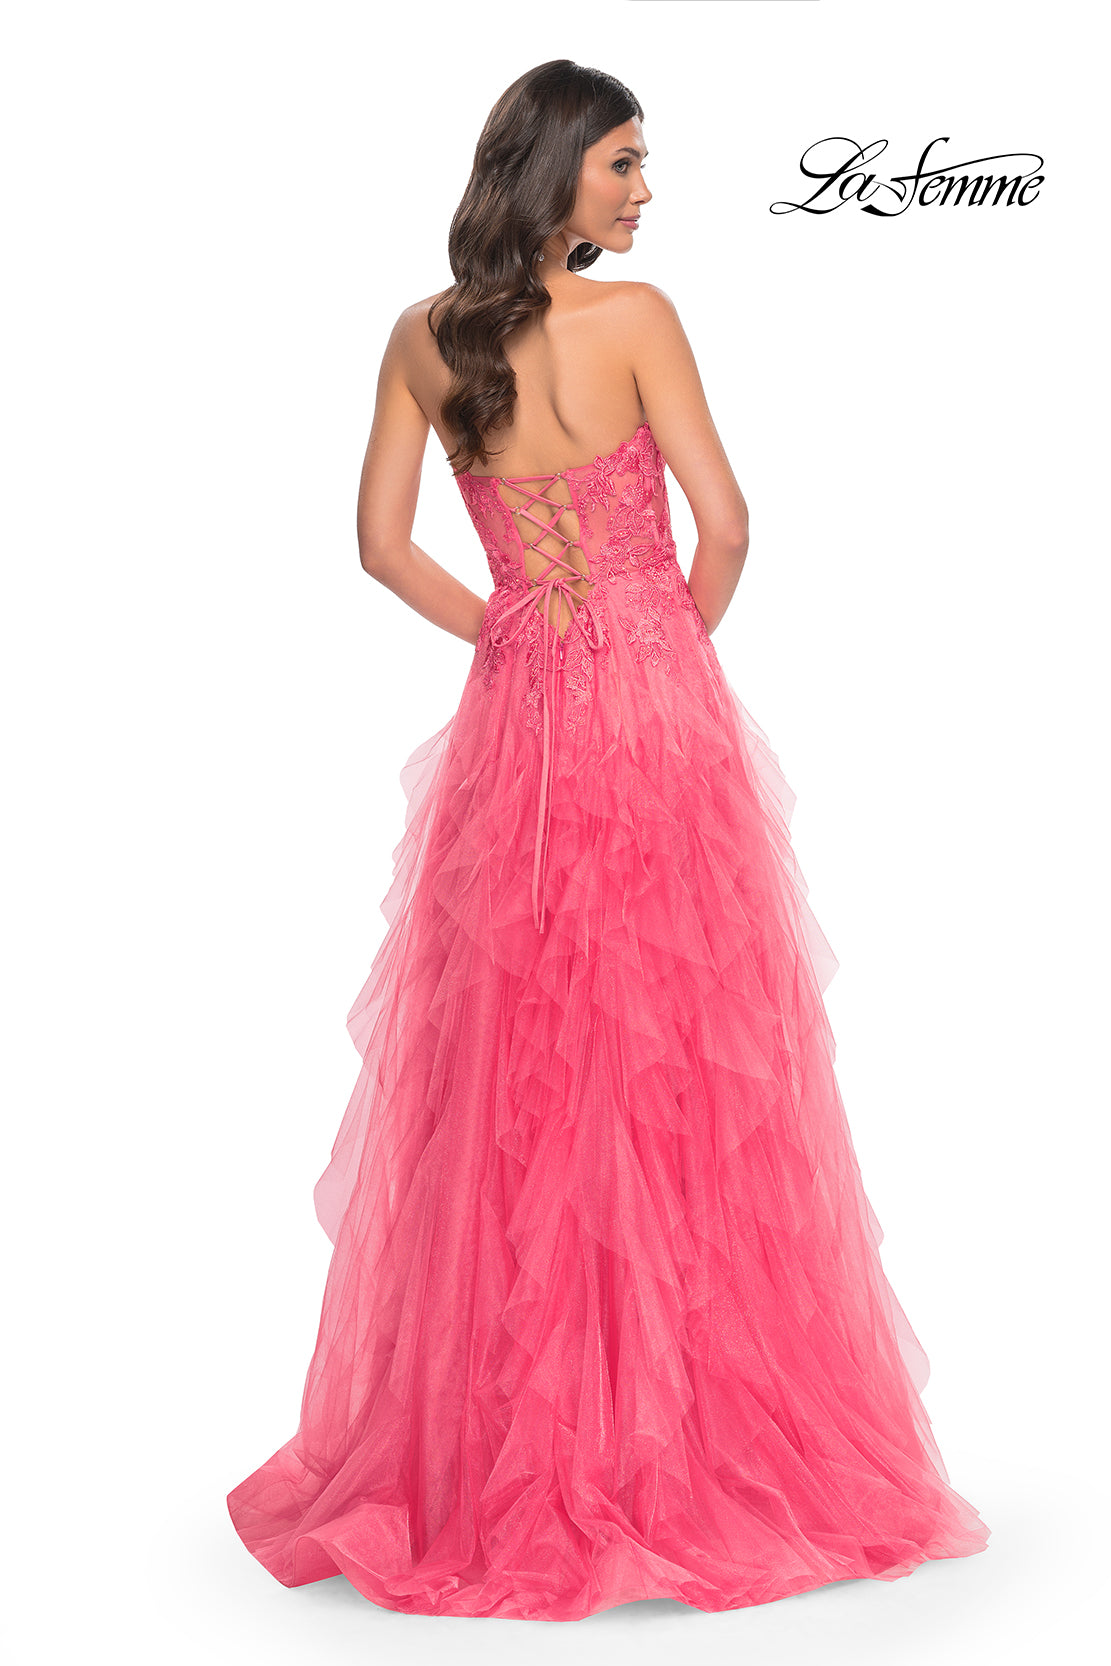 Ruffle Tulle Gown with Lace Up Bustier Bodice